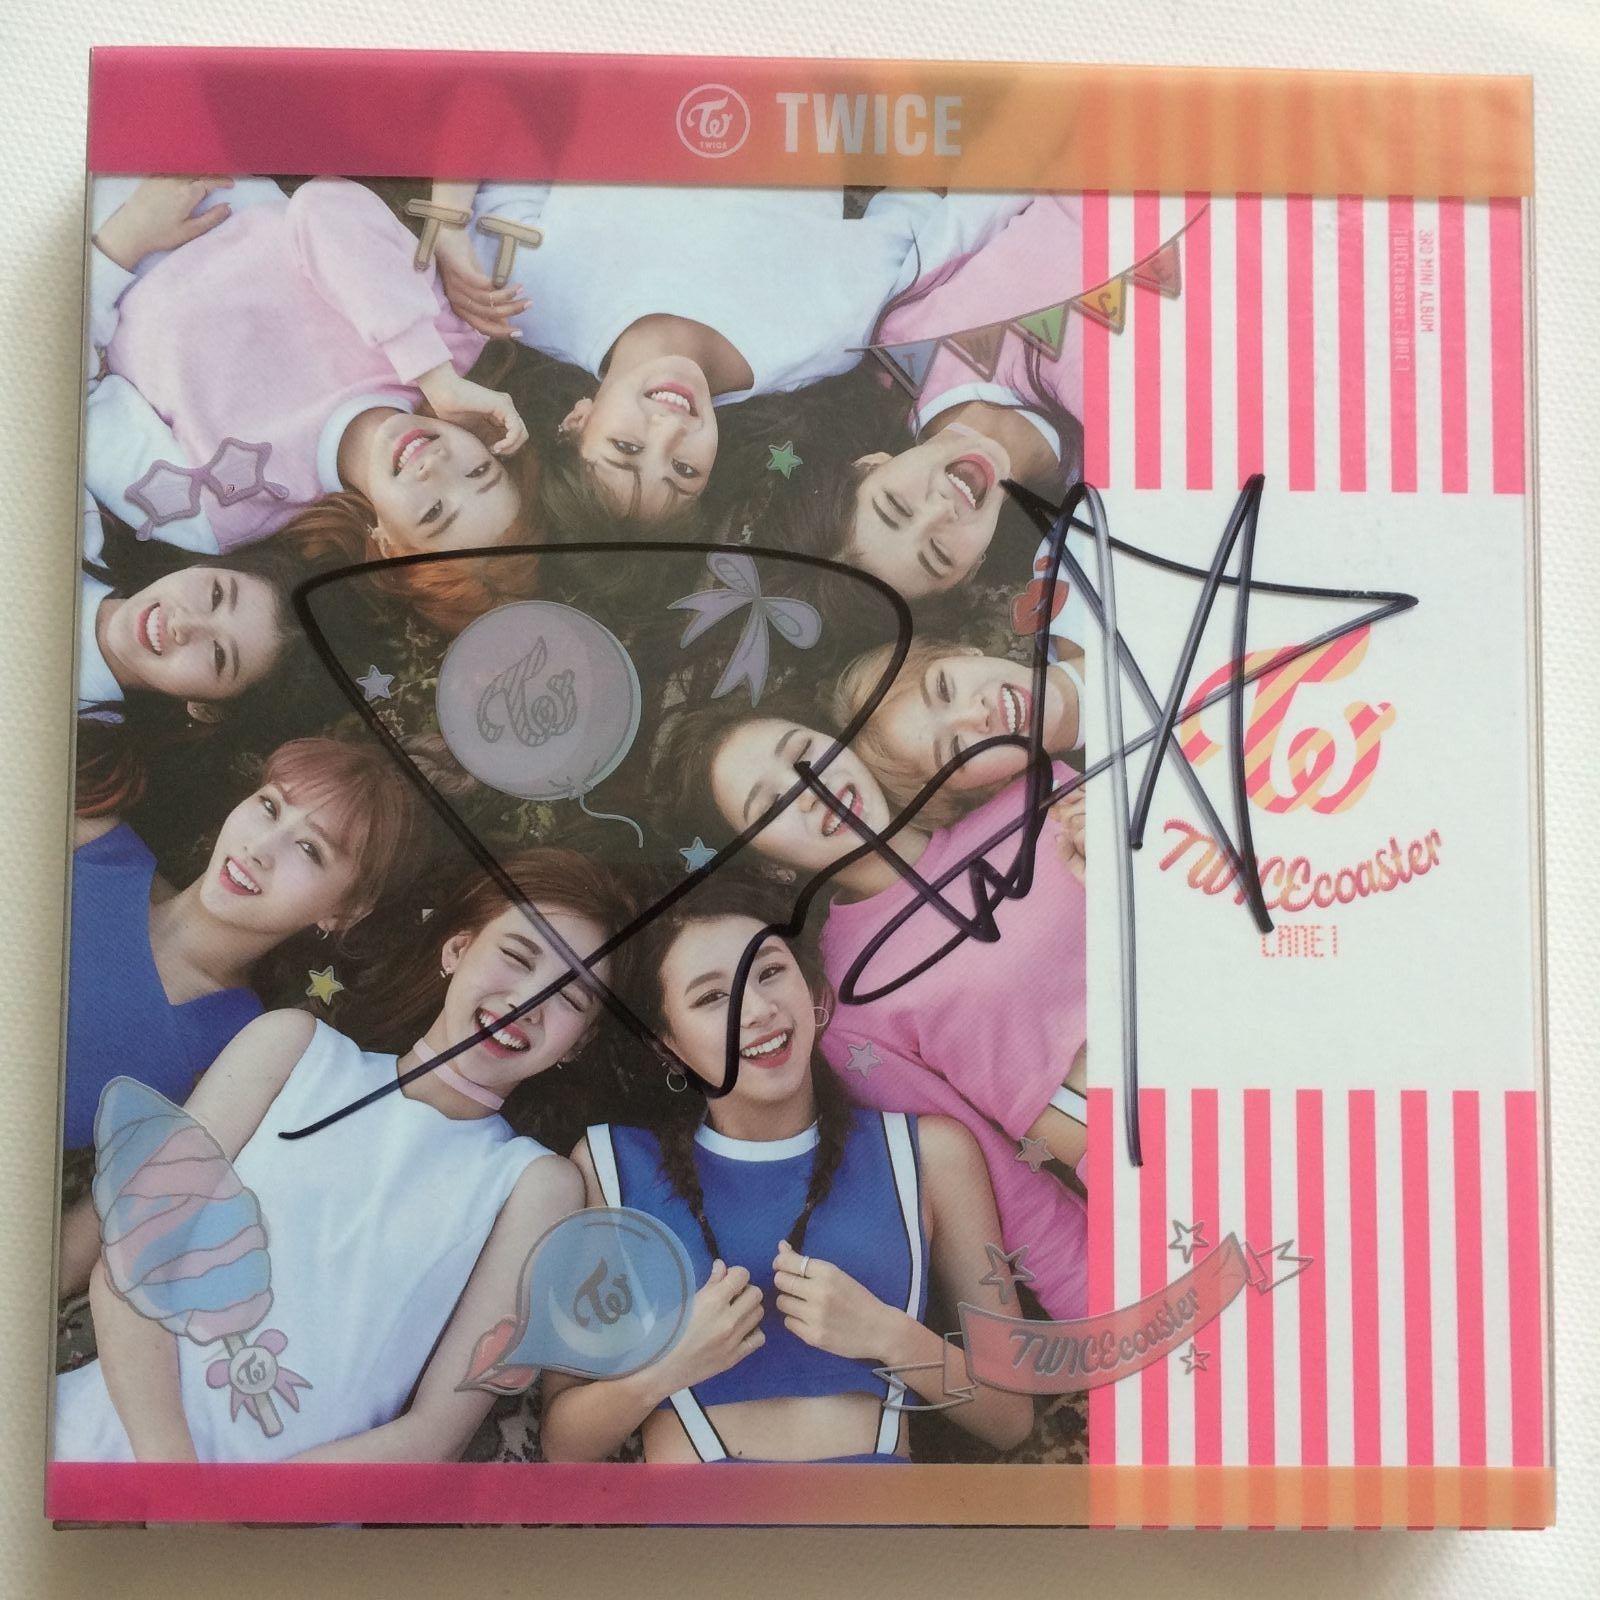 Twice Tt Album Signed By Mina Hobbies Toys Memorabilia Collectibles K Wave On Carousell